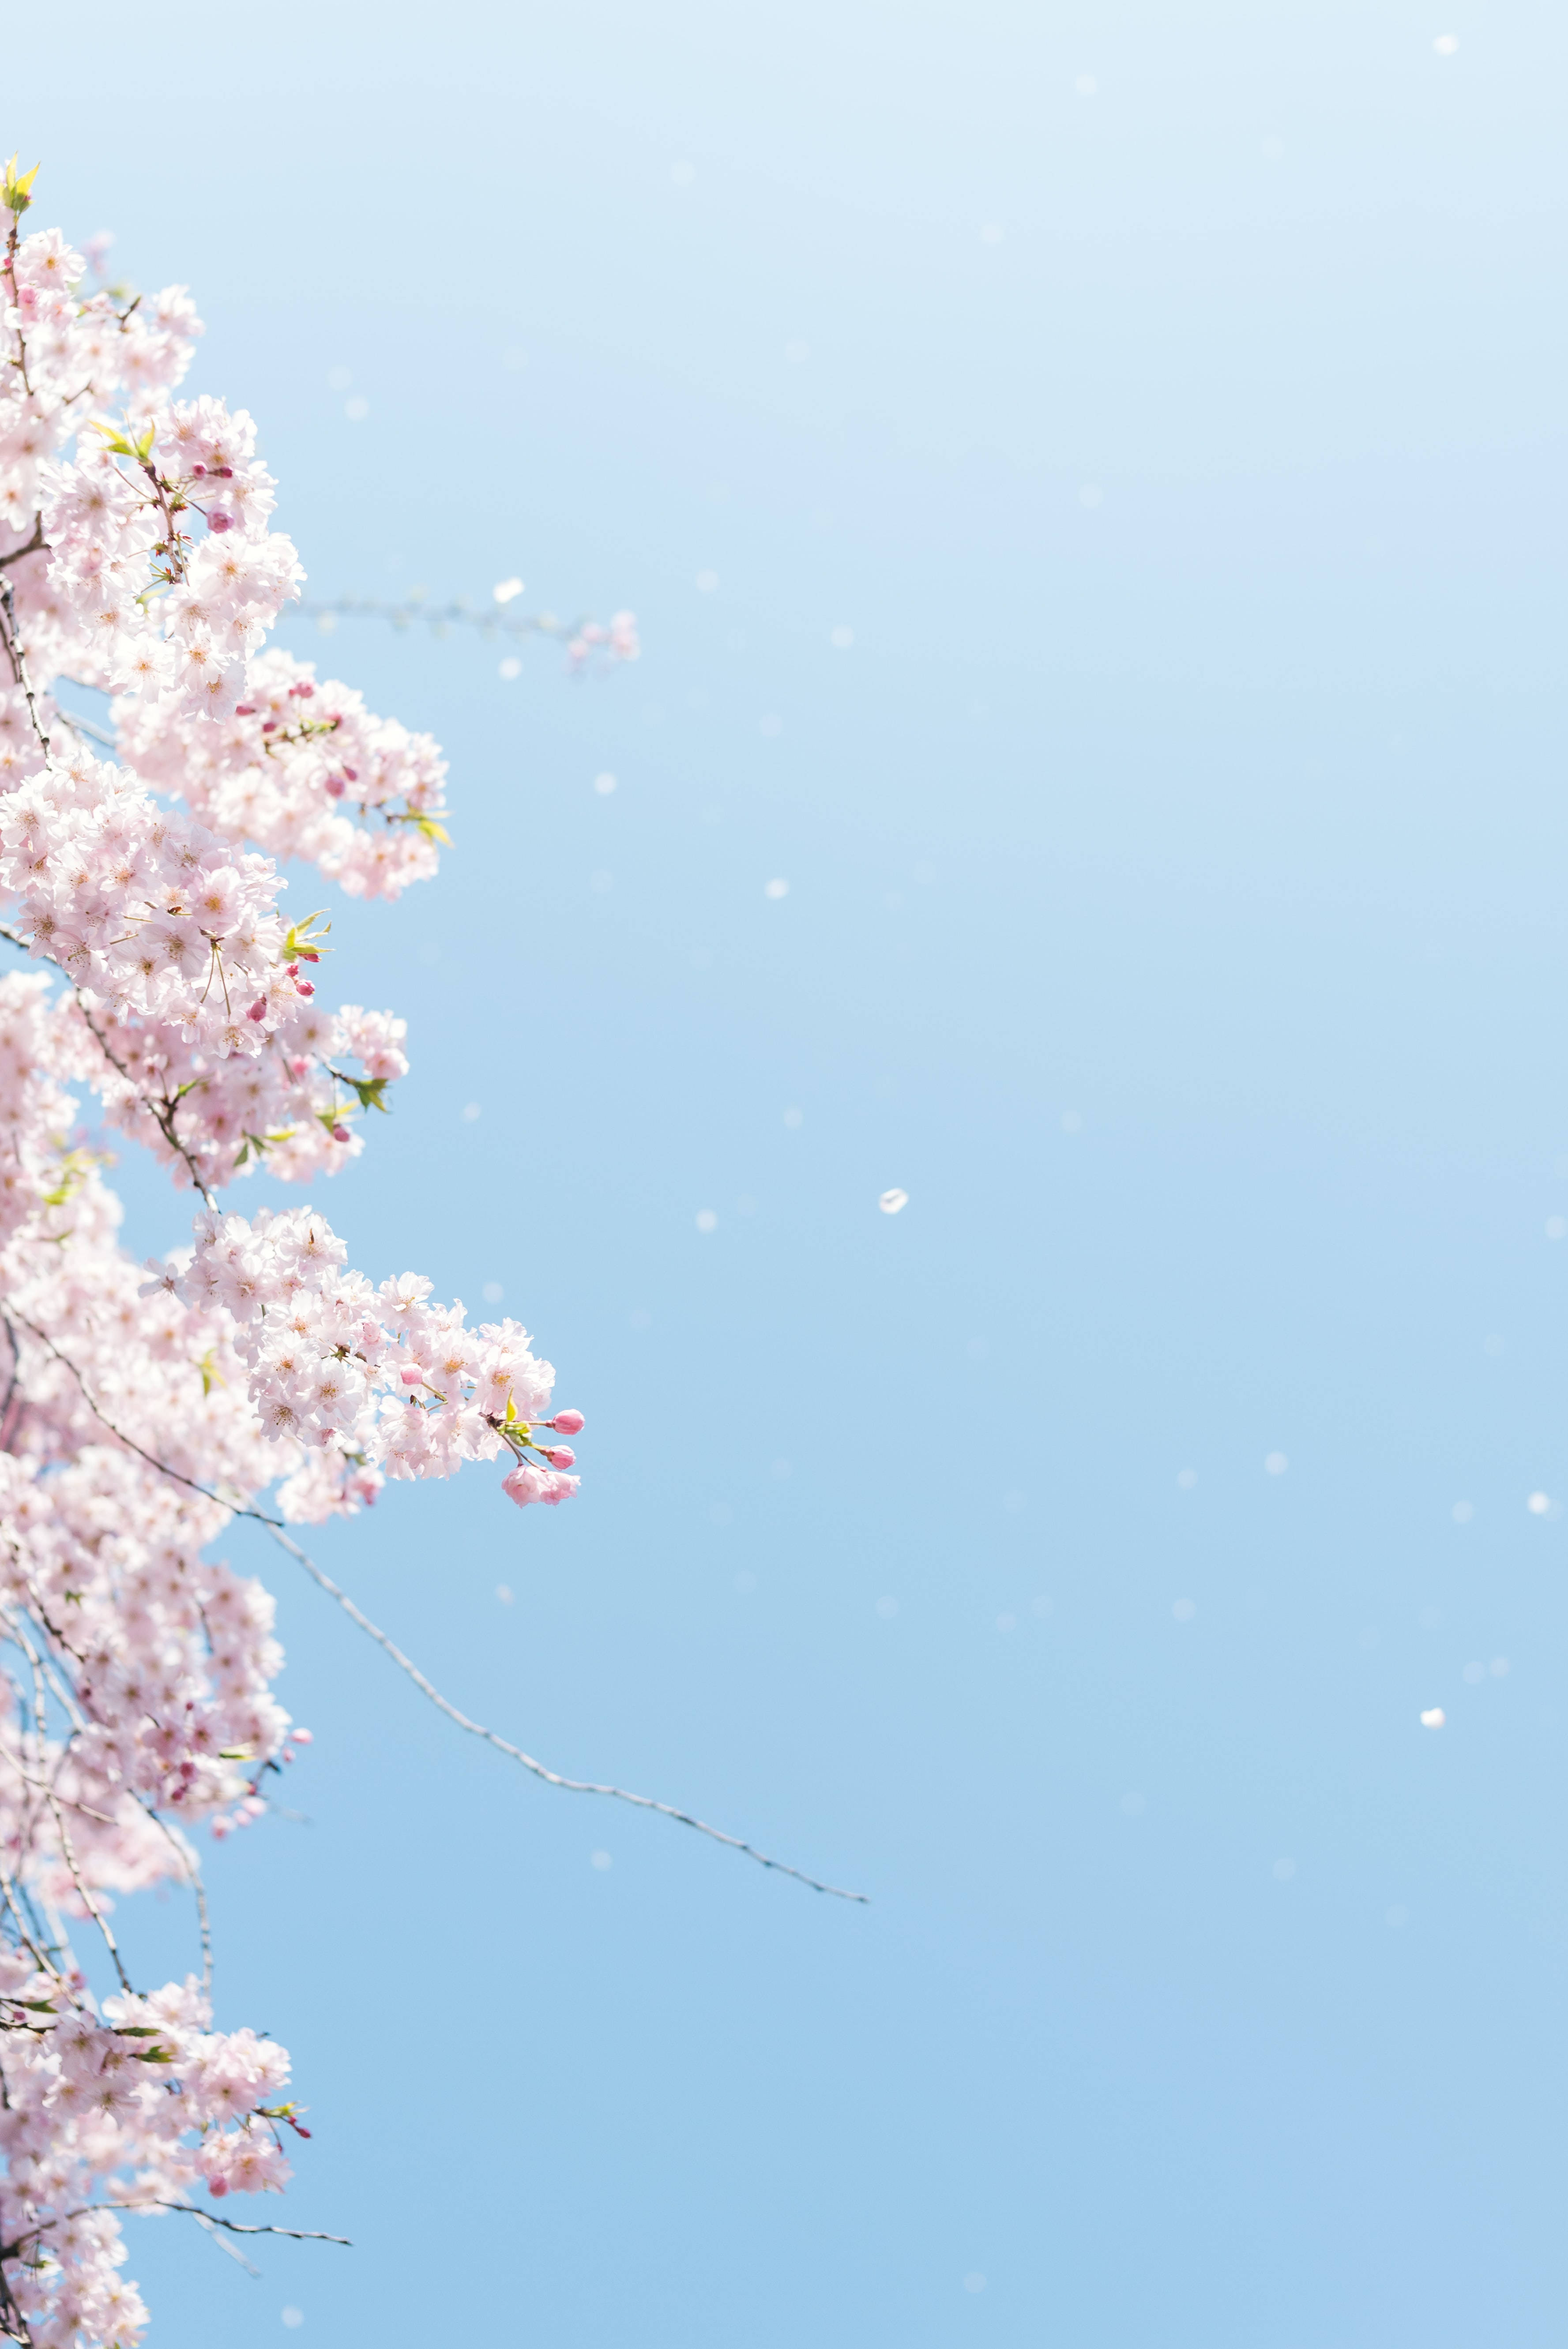 Aesthetic Japanese Hd Cherry Blossoms Background